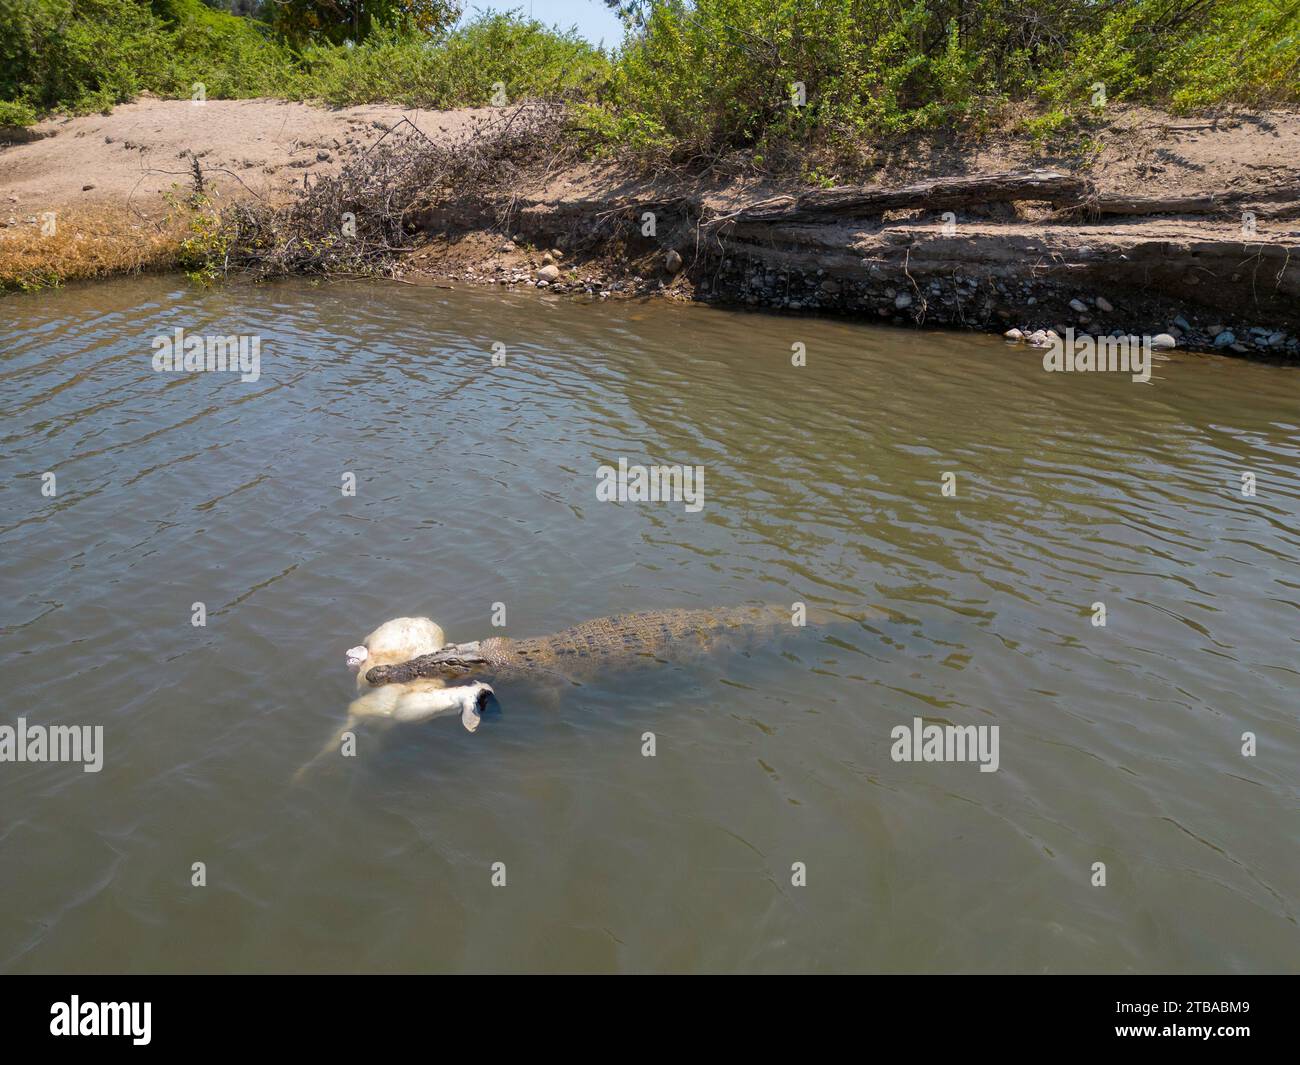 This salt water crocodile, Crocodylus porosus, snatched and killed a domestic sheep from the bank of the Maluilada River, the Democratic Republic of T Stock Photo